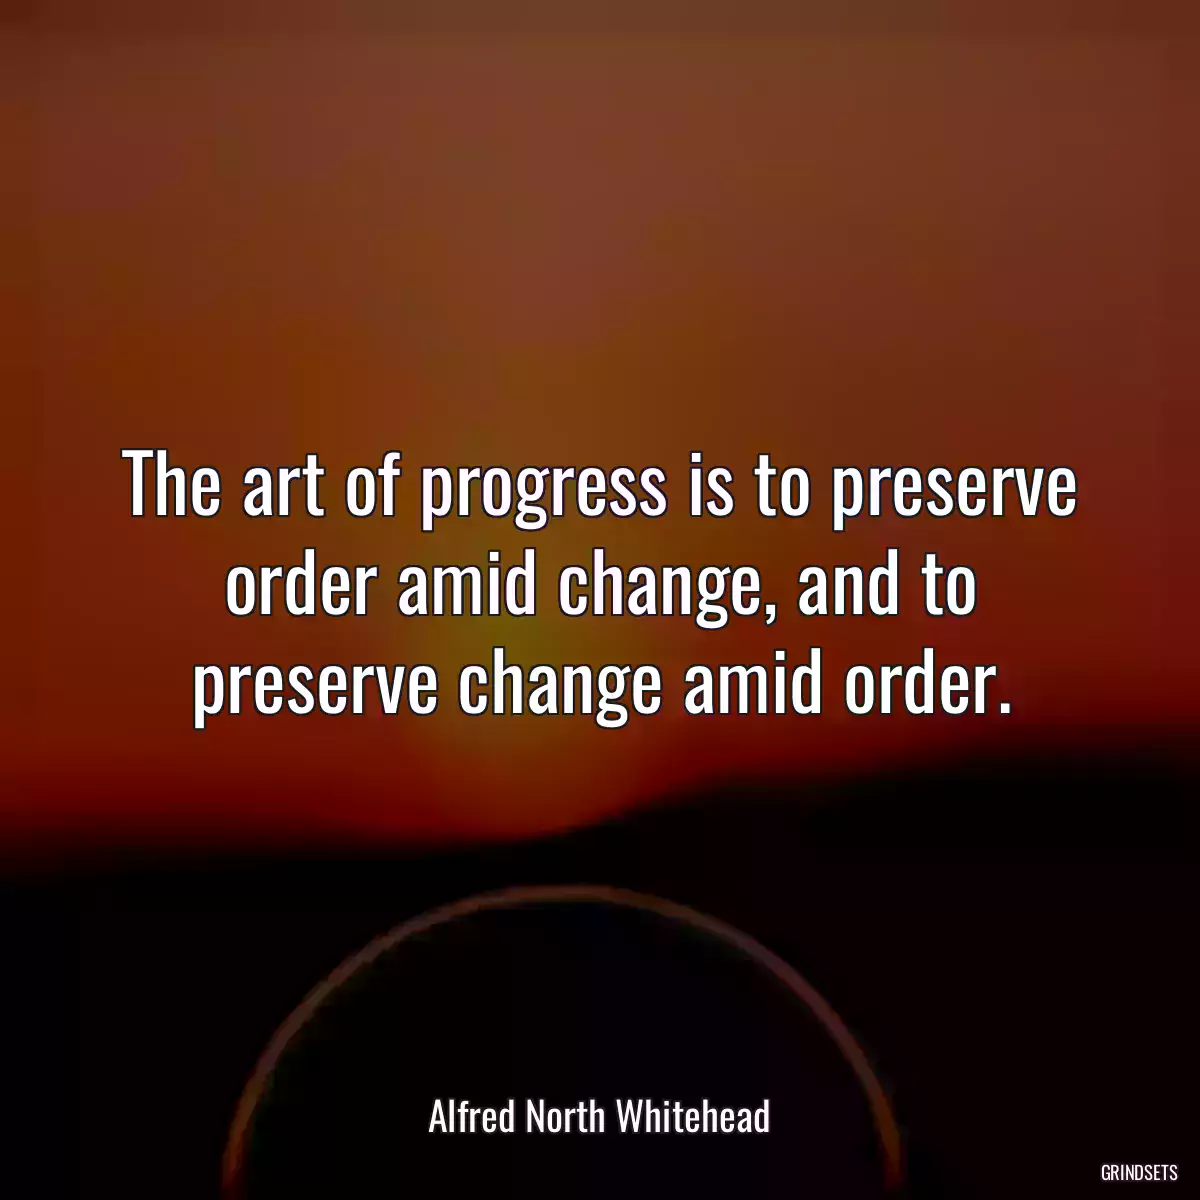 The art of progress is to preserve order amid change, and to preserve change amid order.